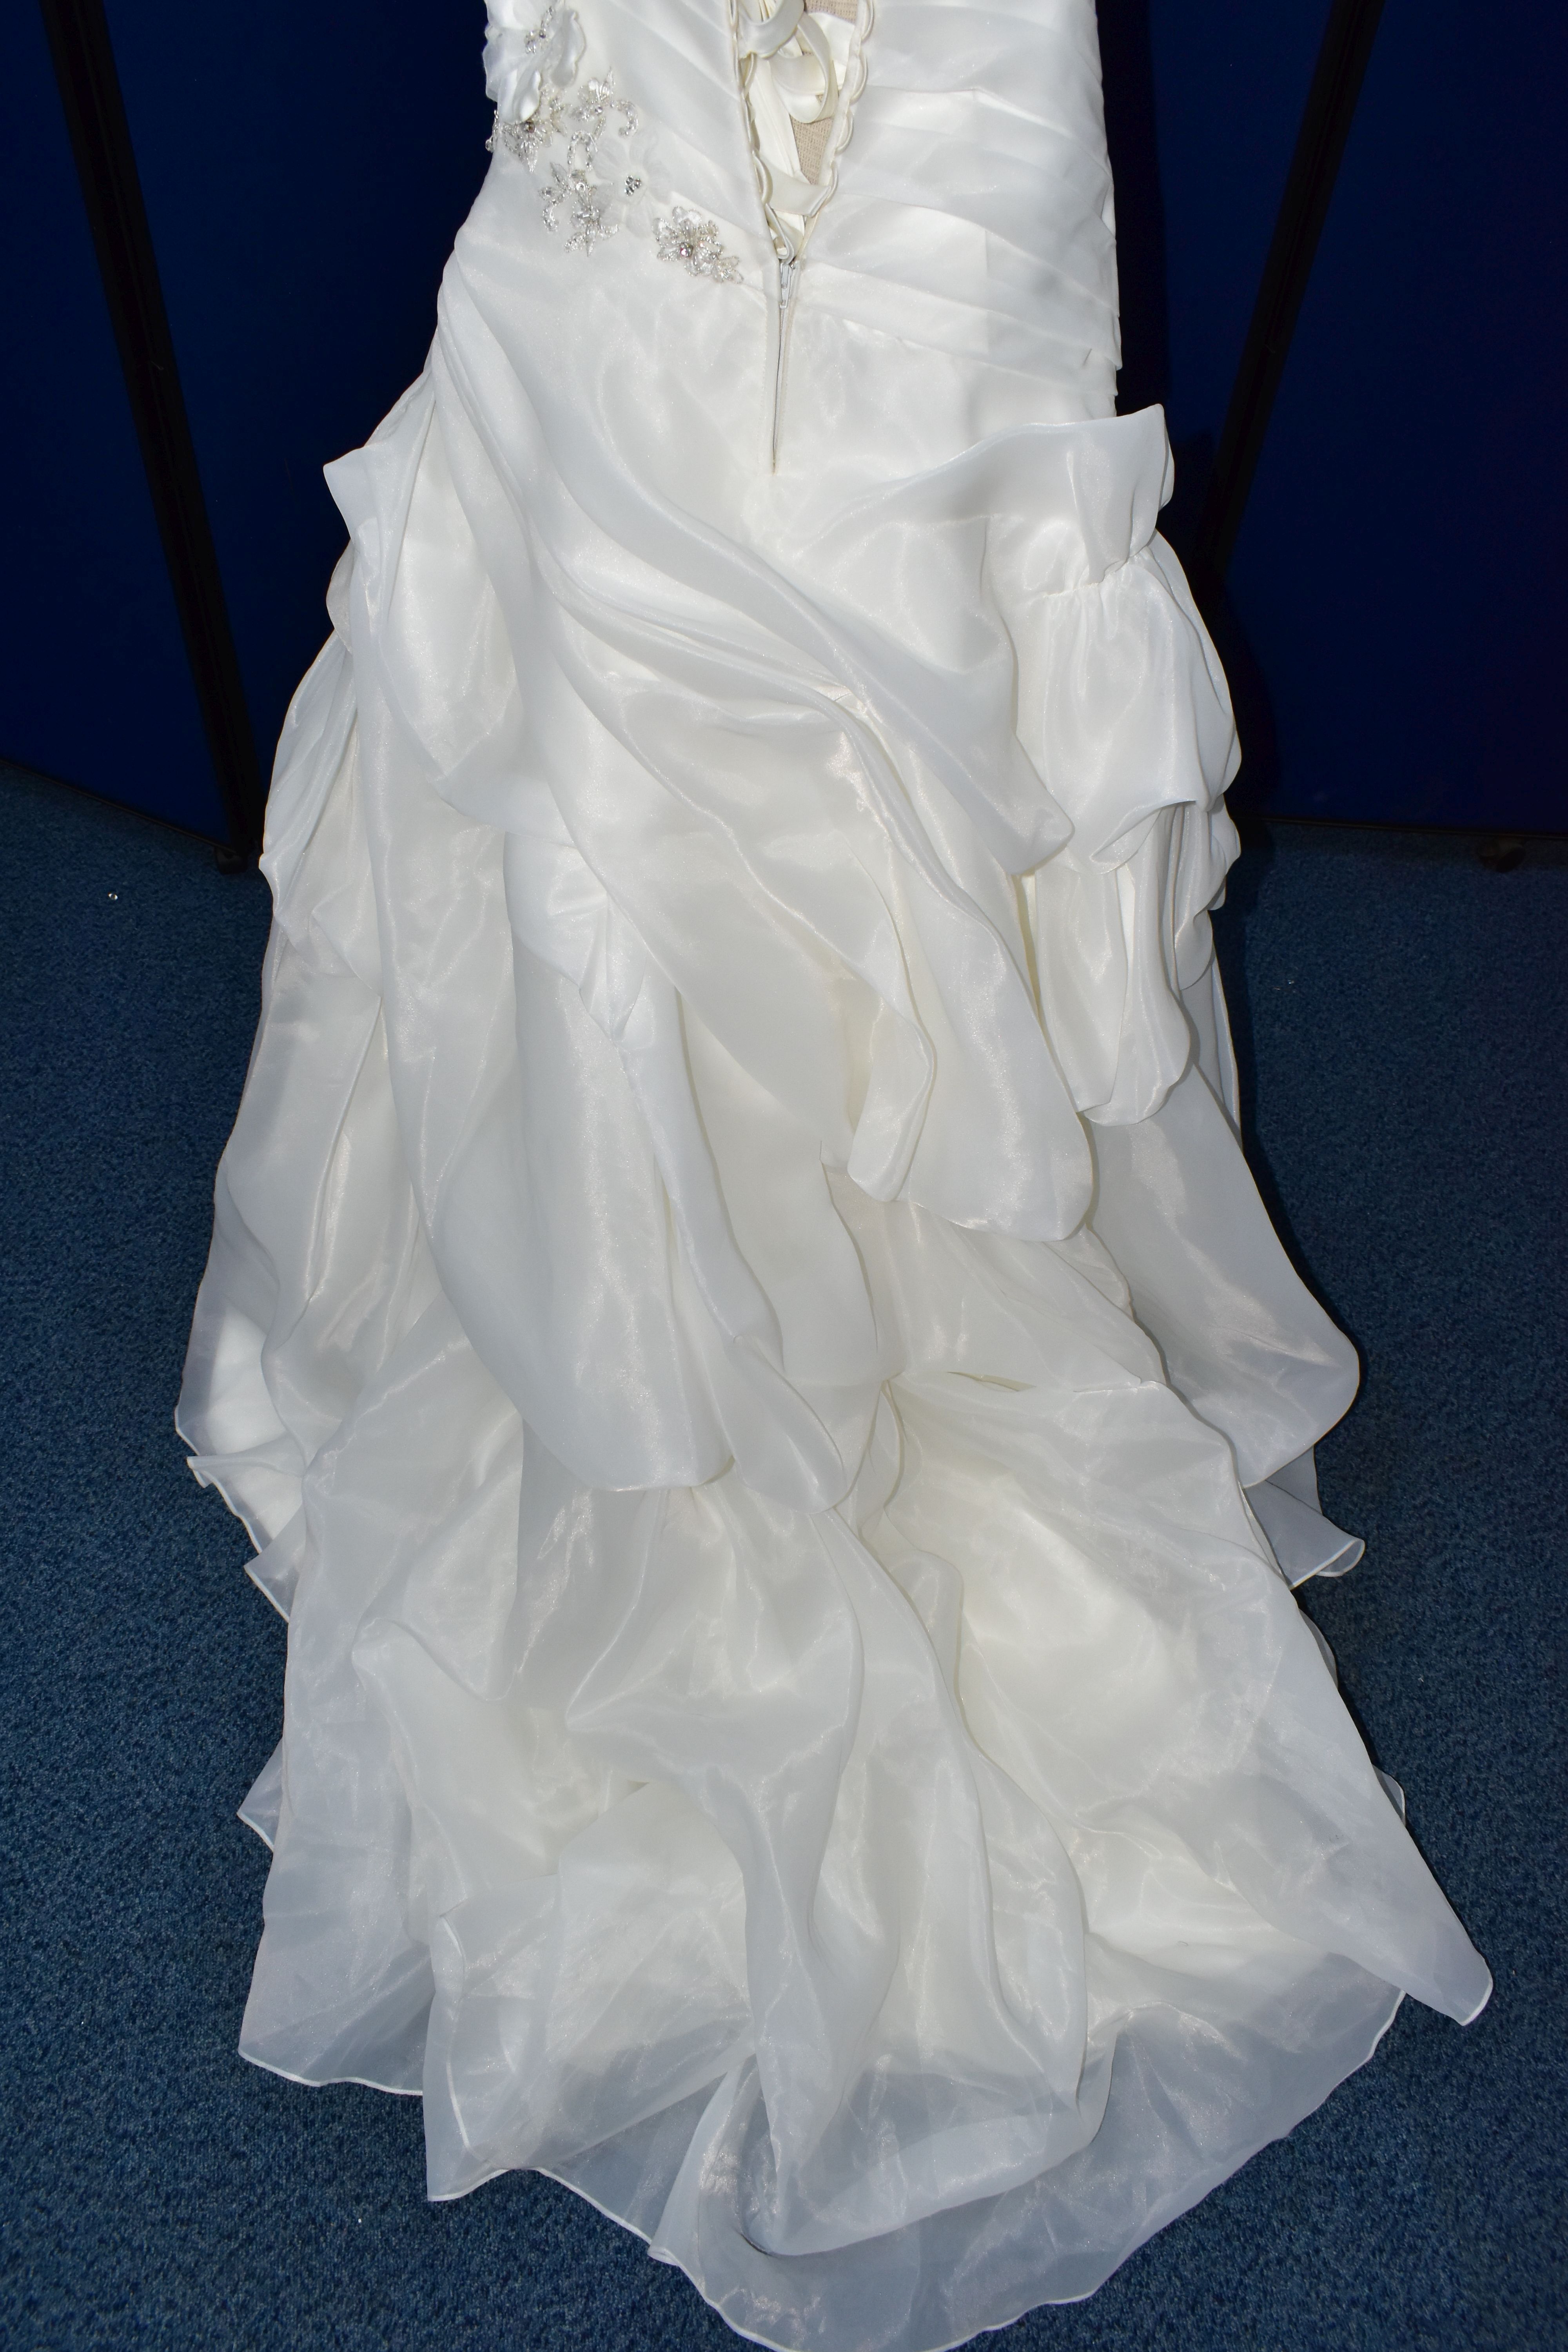 WEDDING GOWN, 'Kenneth Winston' Private Label by G, size 8/10, white pleated bodice, halter neck, - Image 15 of 17